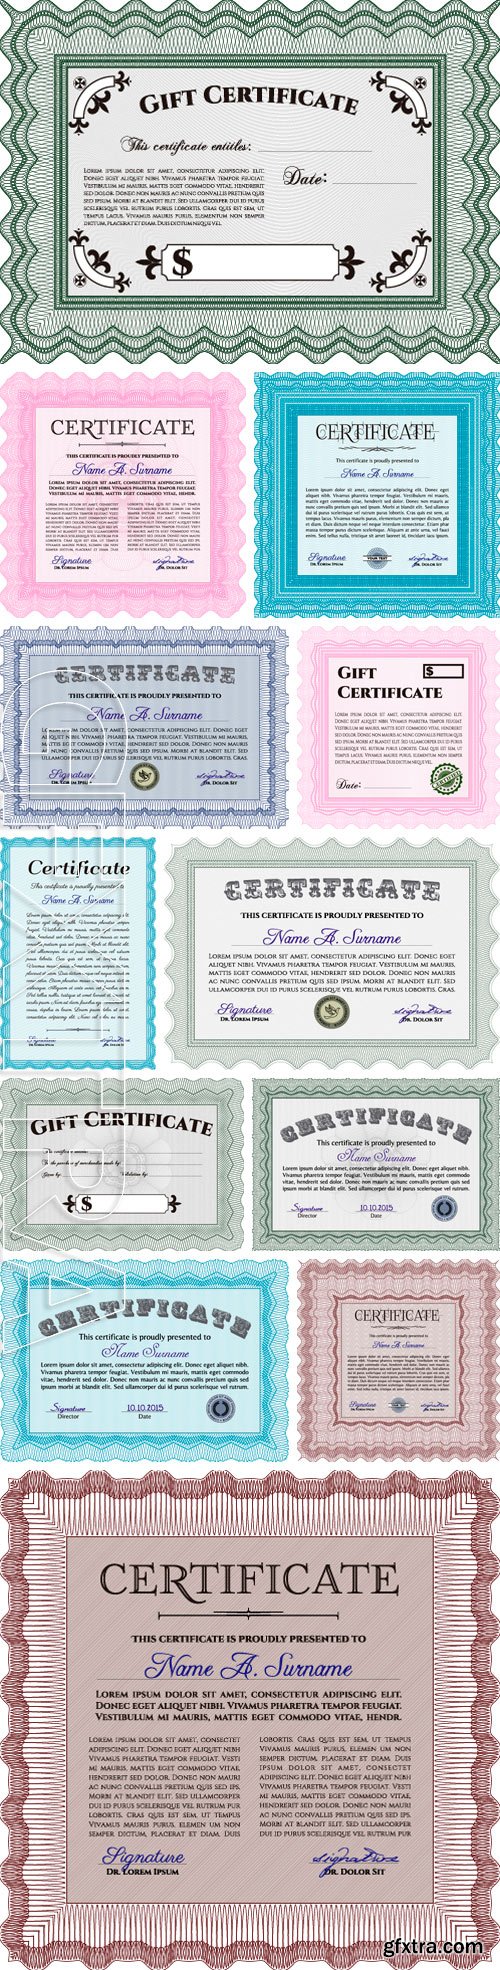 Stock Vectors - Certificate template. Border, frame.With quality background. Artistry design